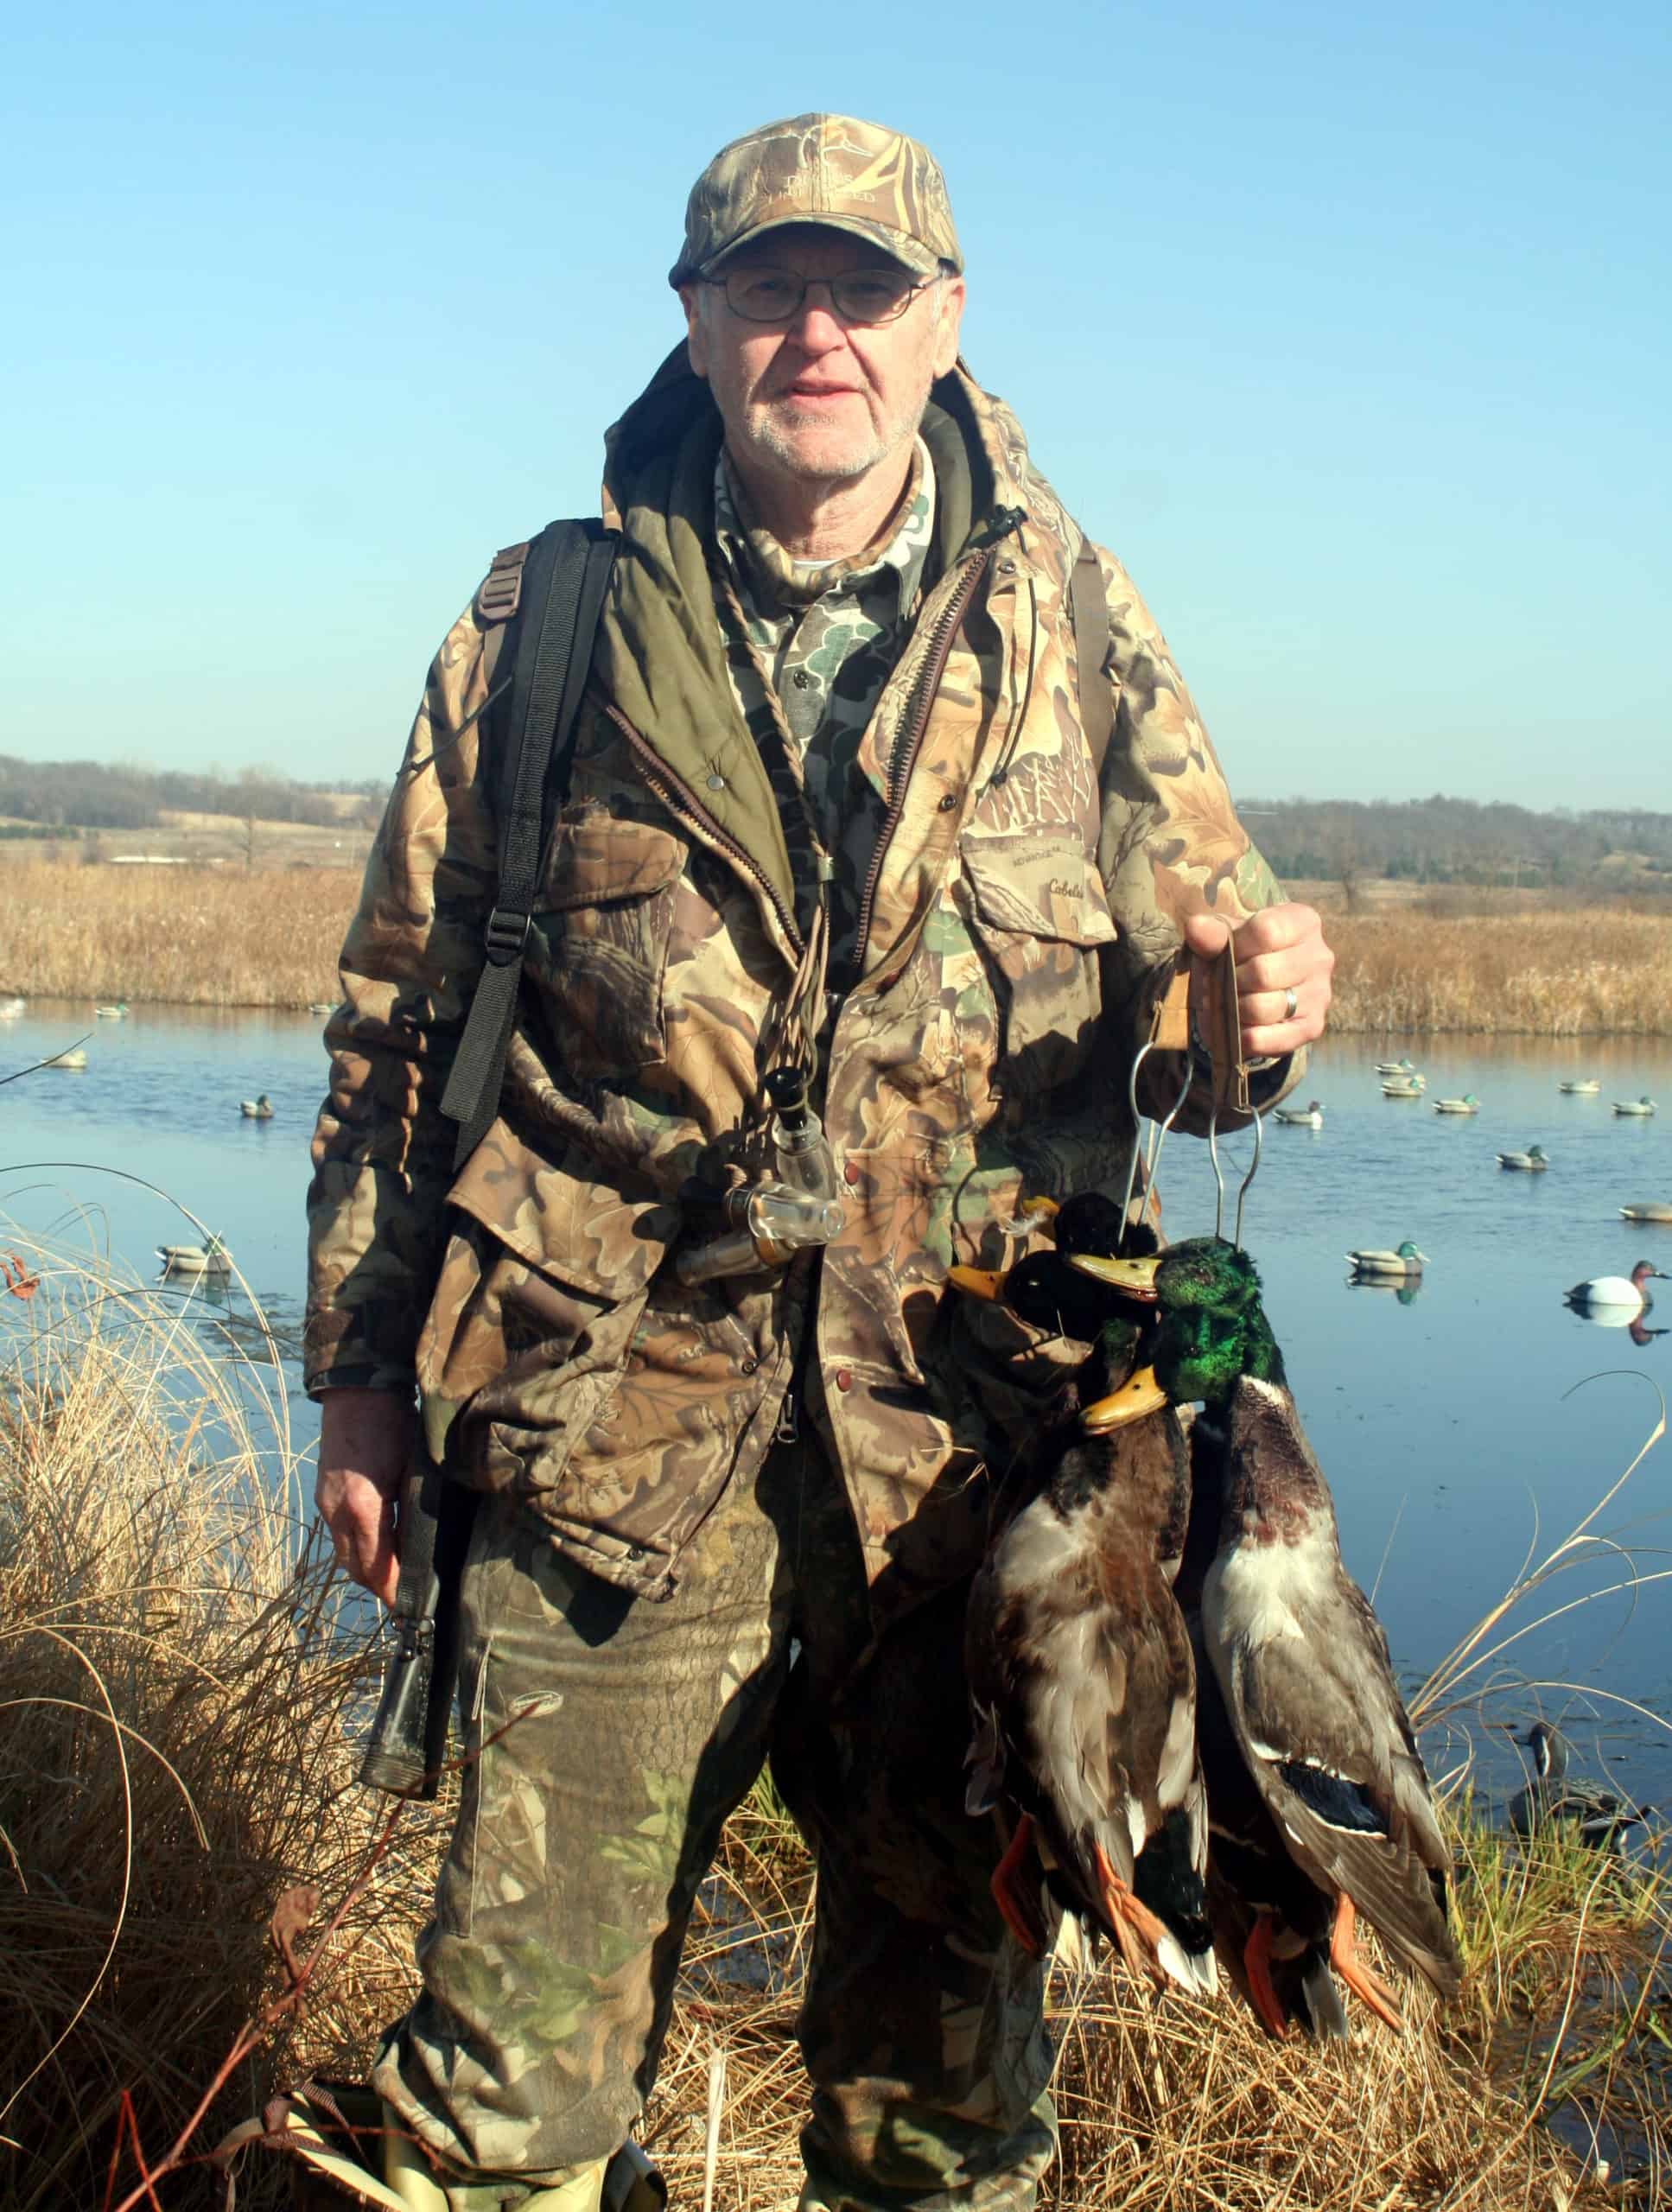 While states to the south get the attention, Missouri gets the ducks. Paul Knick shows off a fine brace of Missouri mallards.